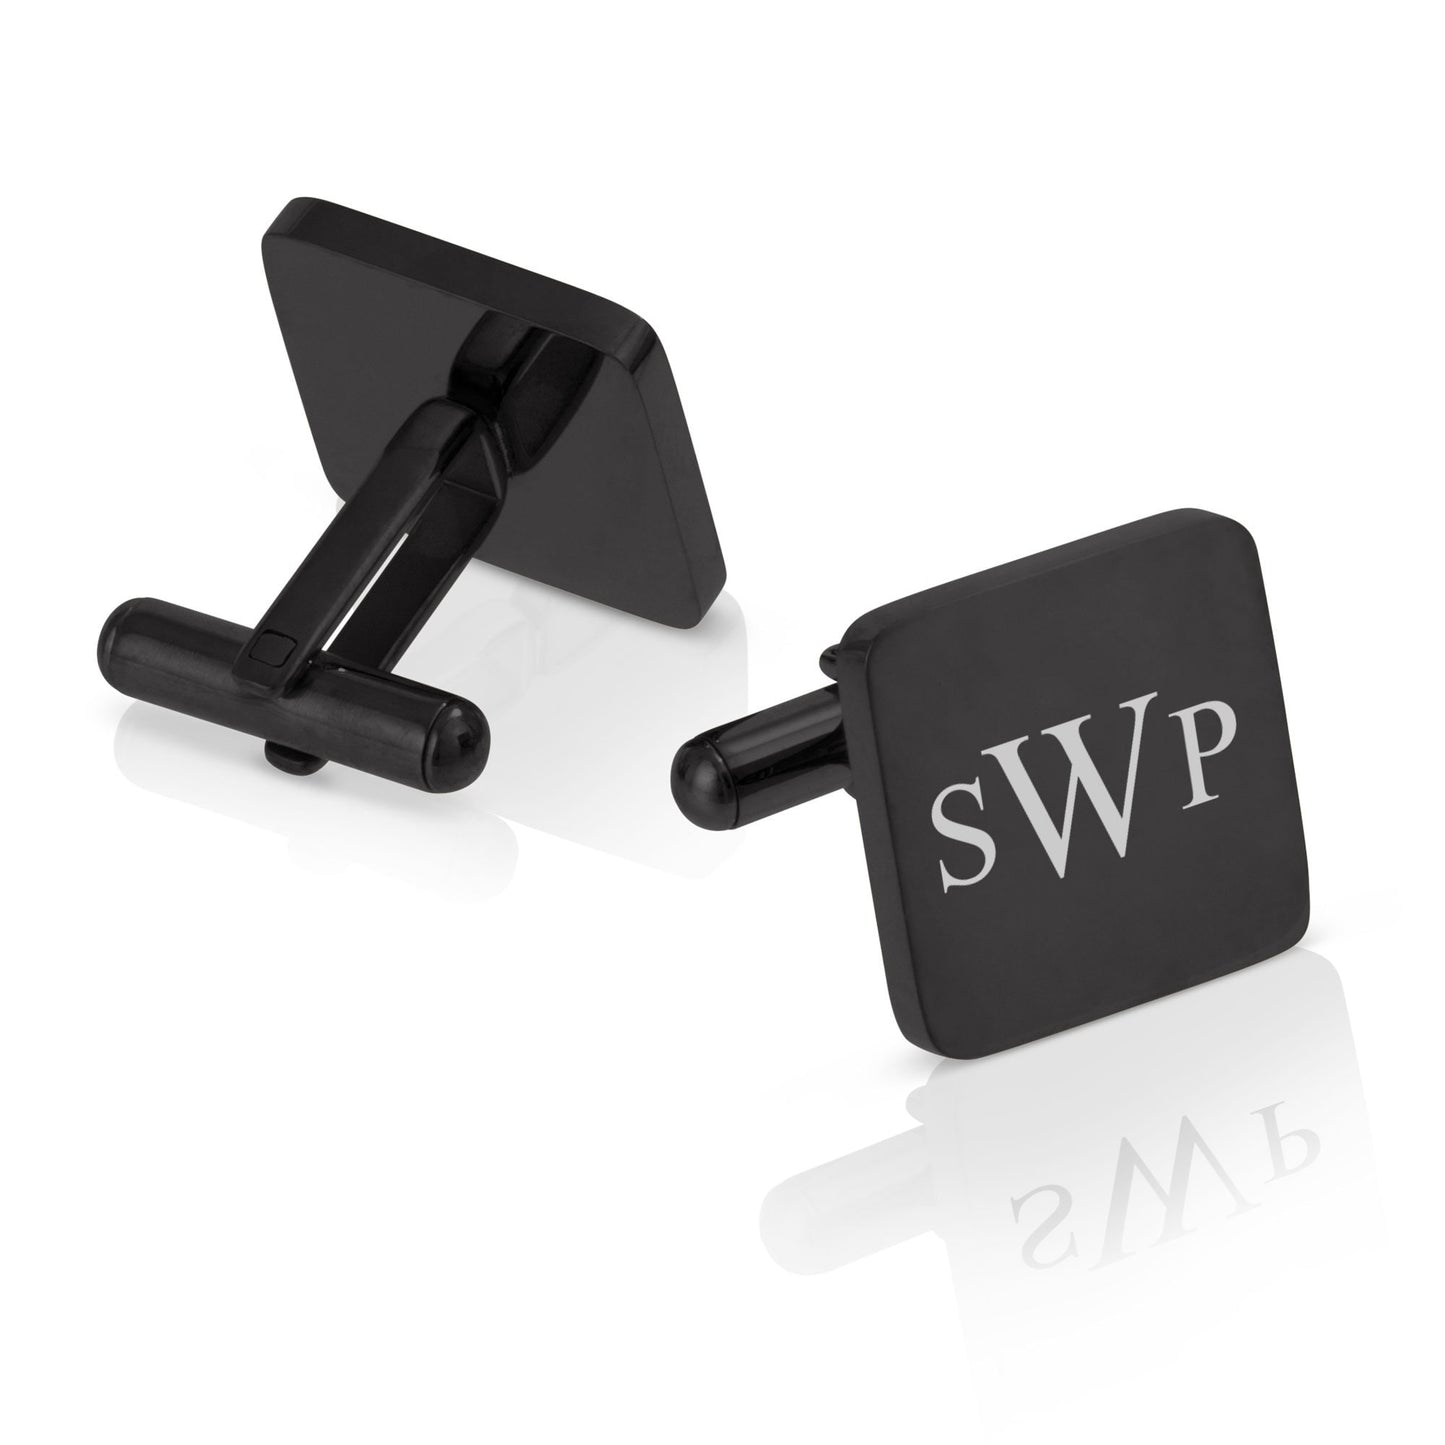 Personalised engraved stainless steel square initials cufflinks gift |   wedding birthday valentines day anniversary silver black